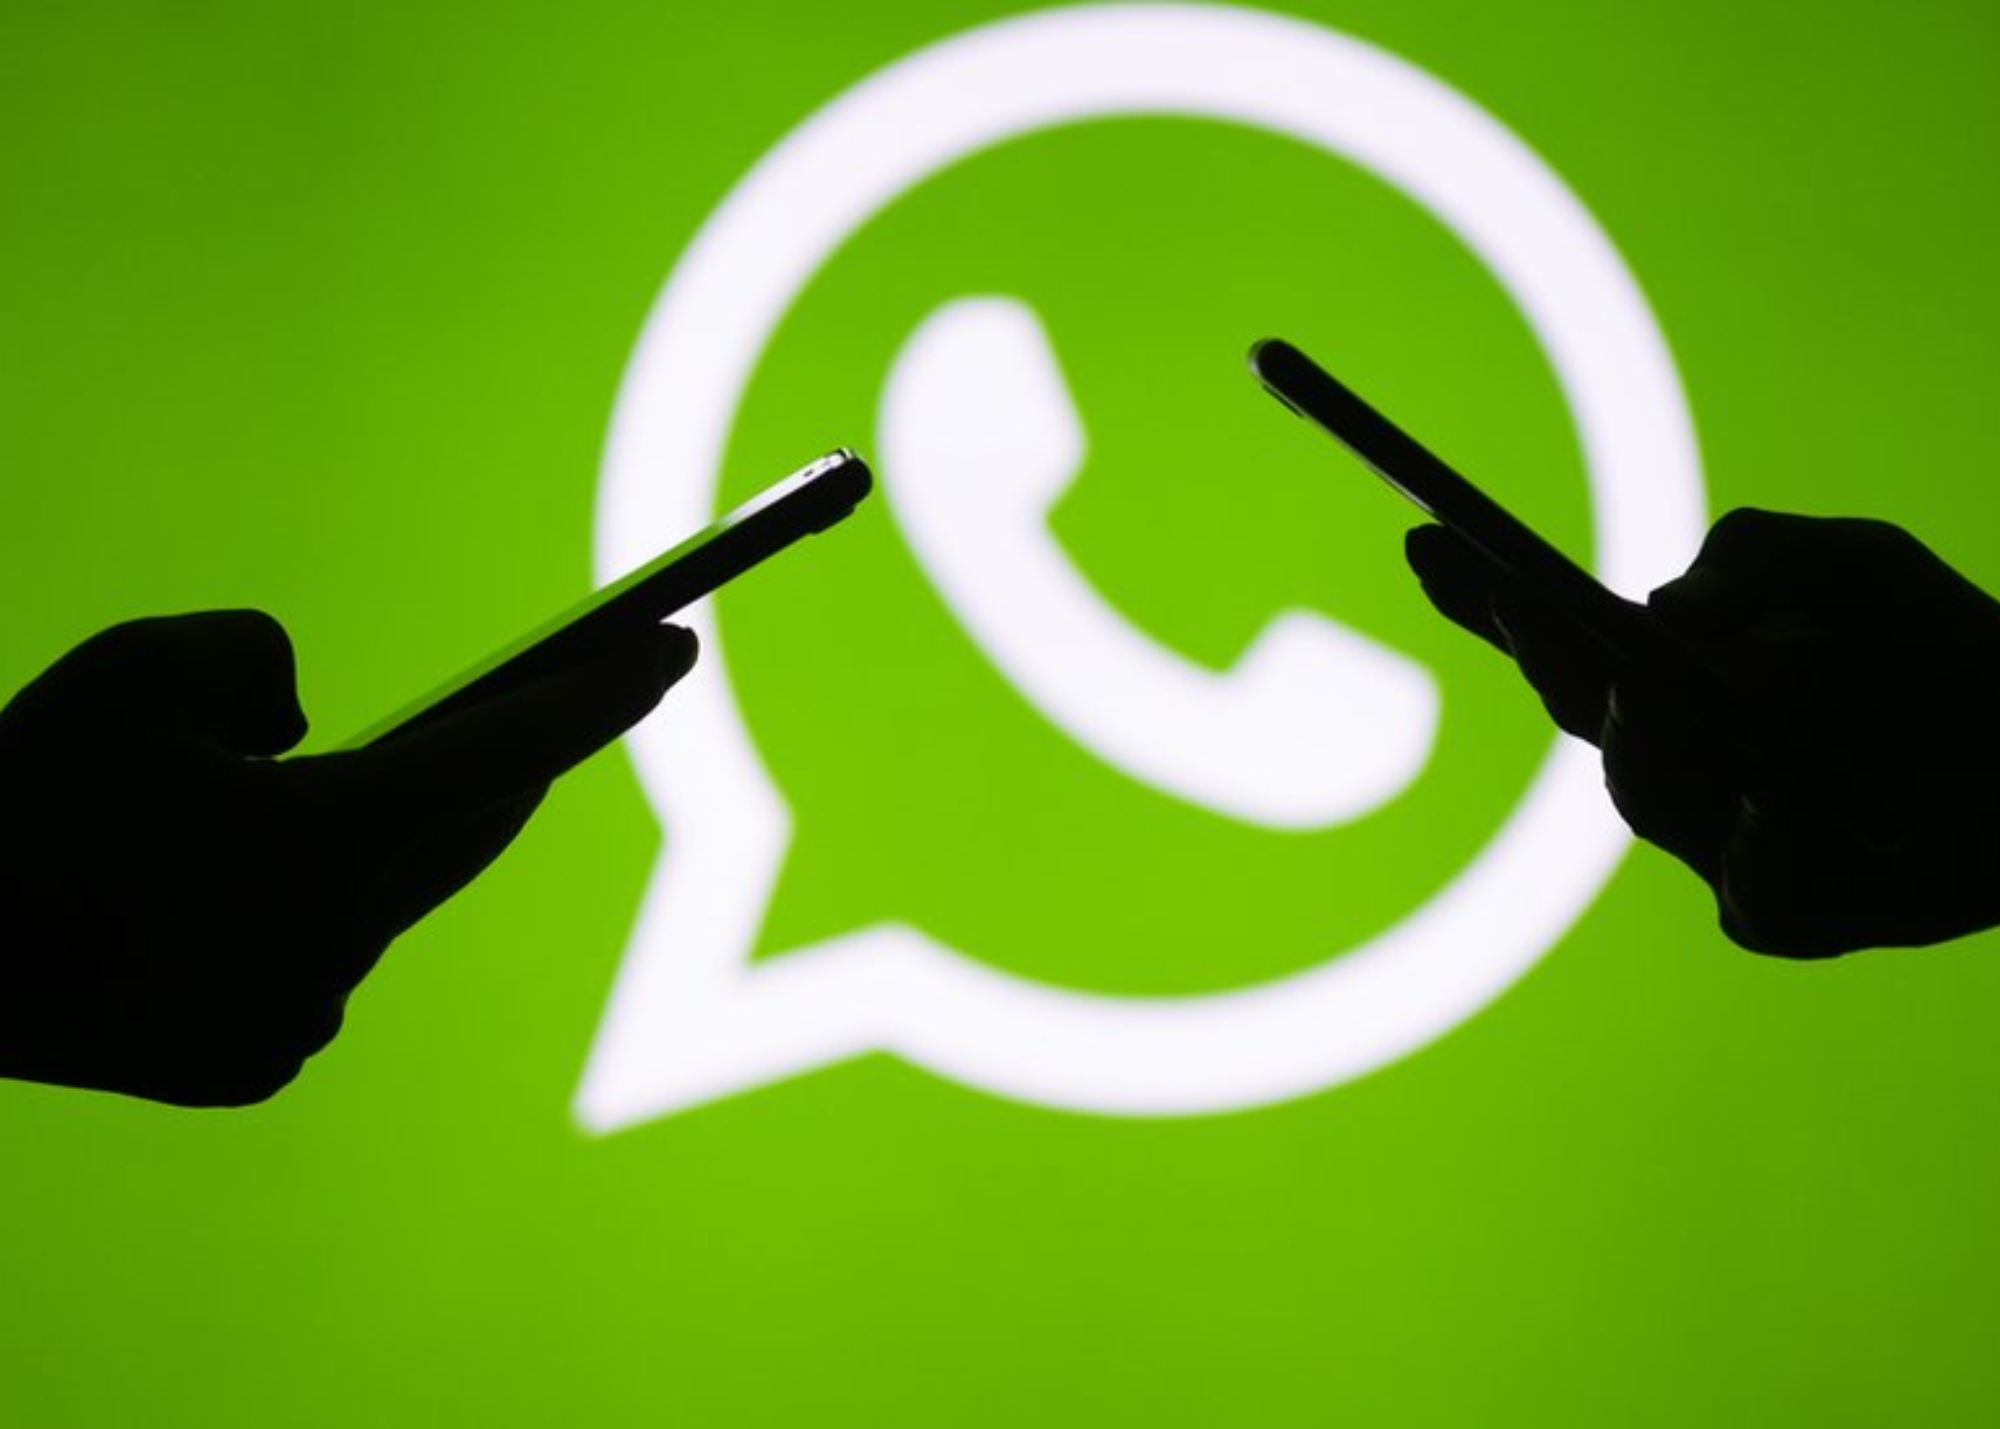 WhatsApp Faces The Threat Of Hacker Invasion, Says The Telegram Founder